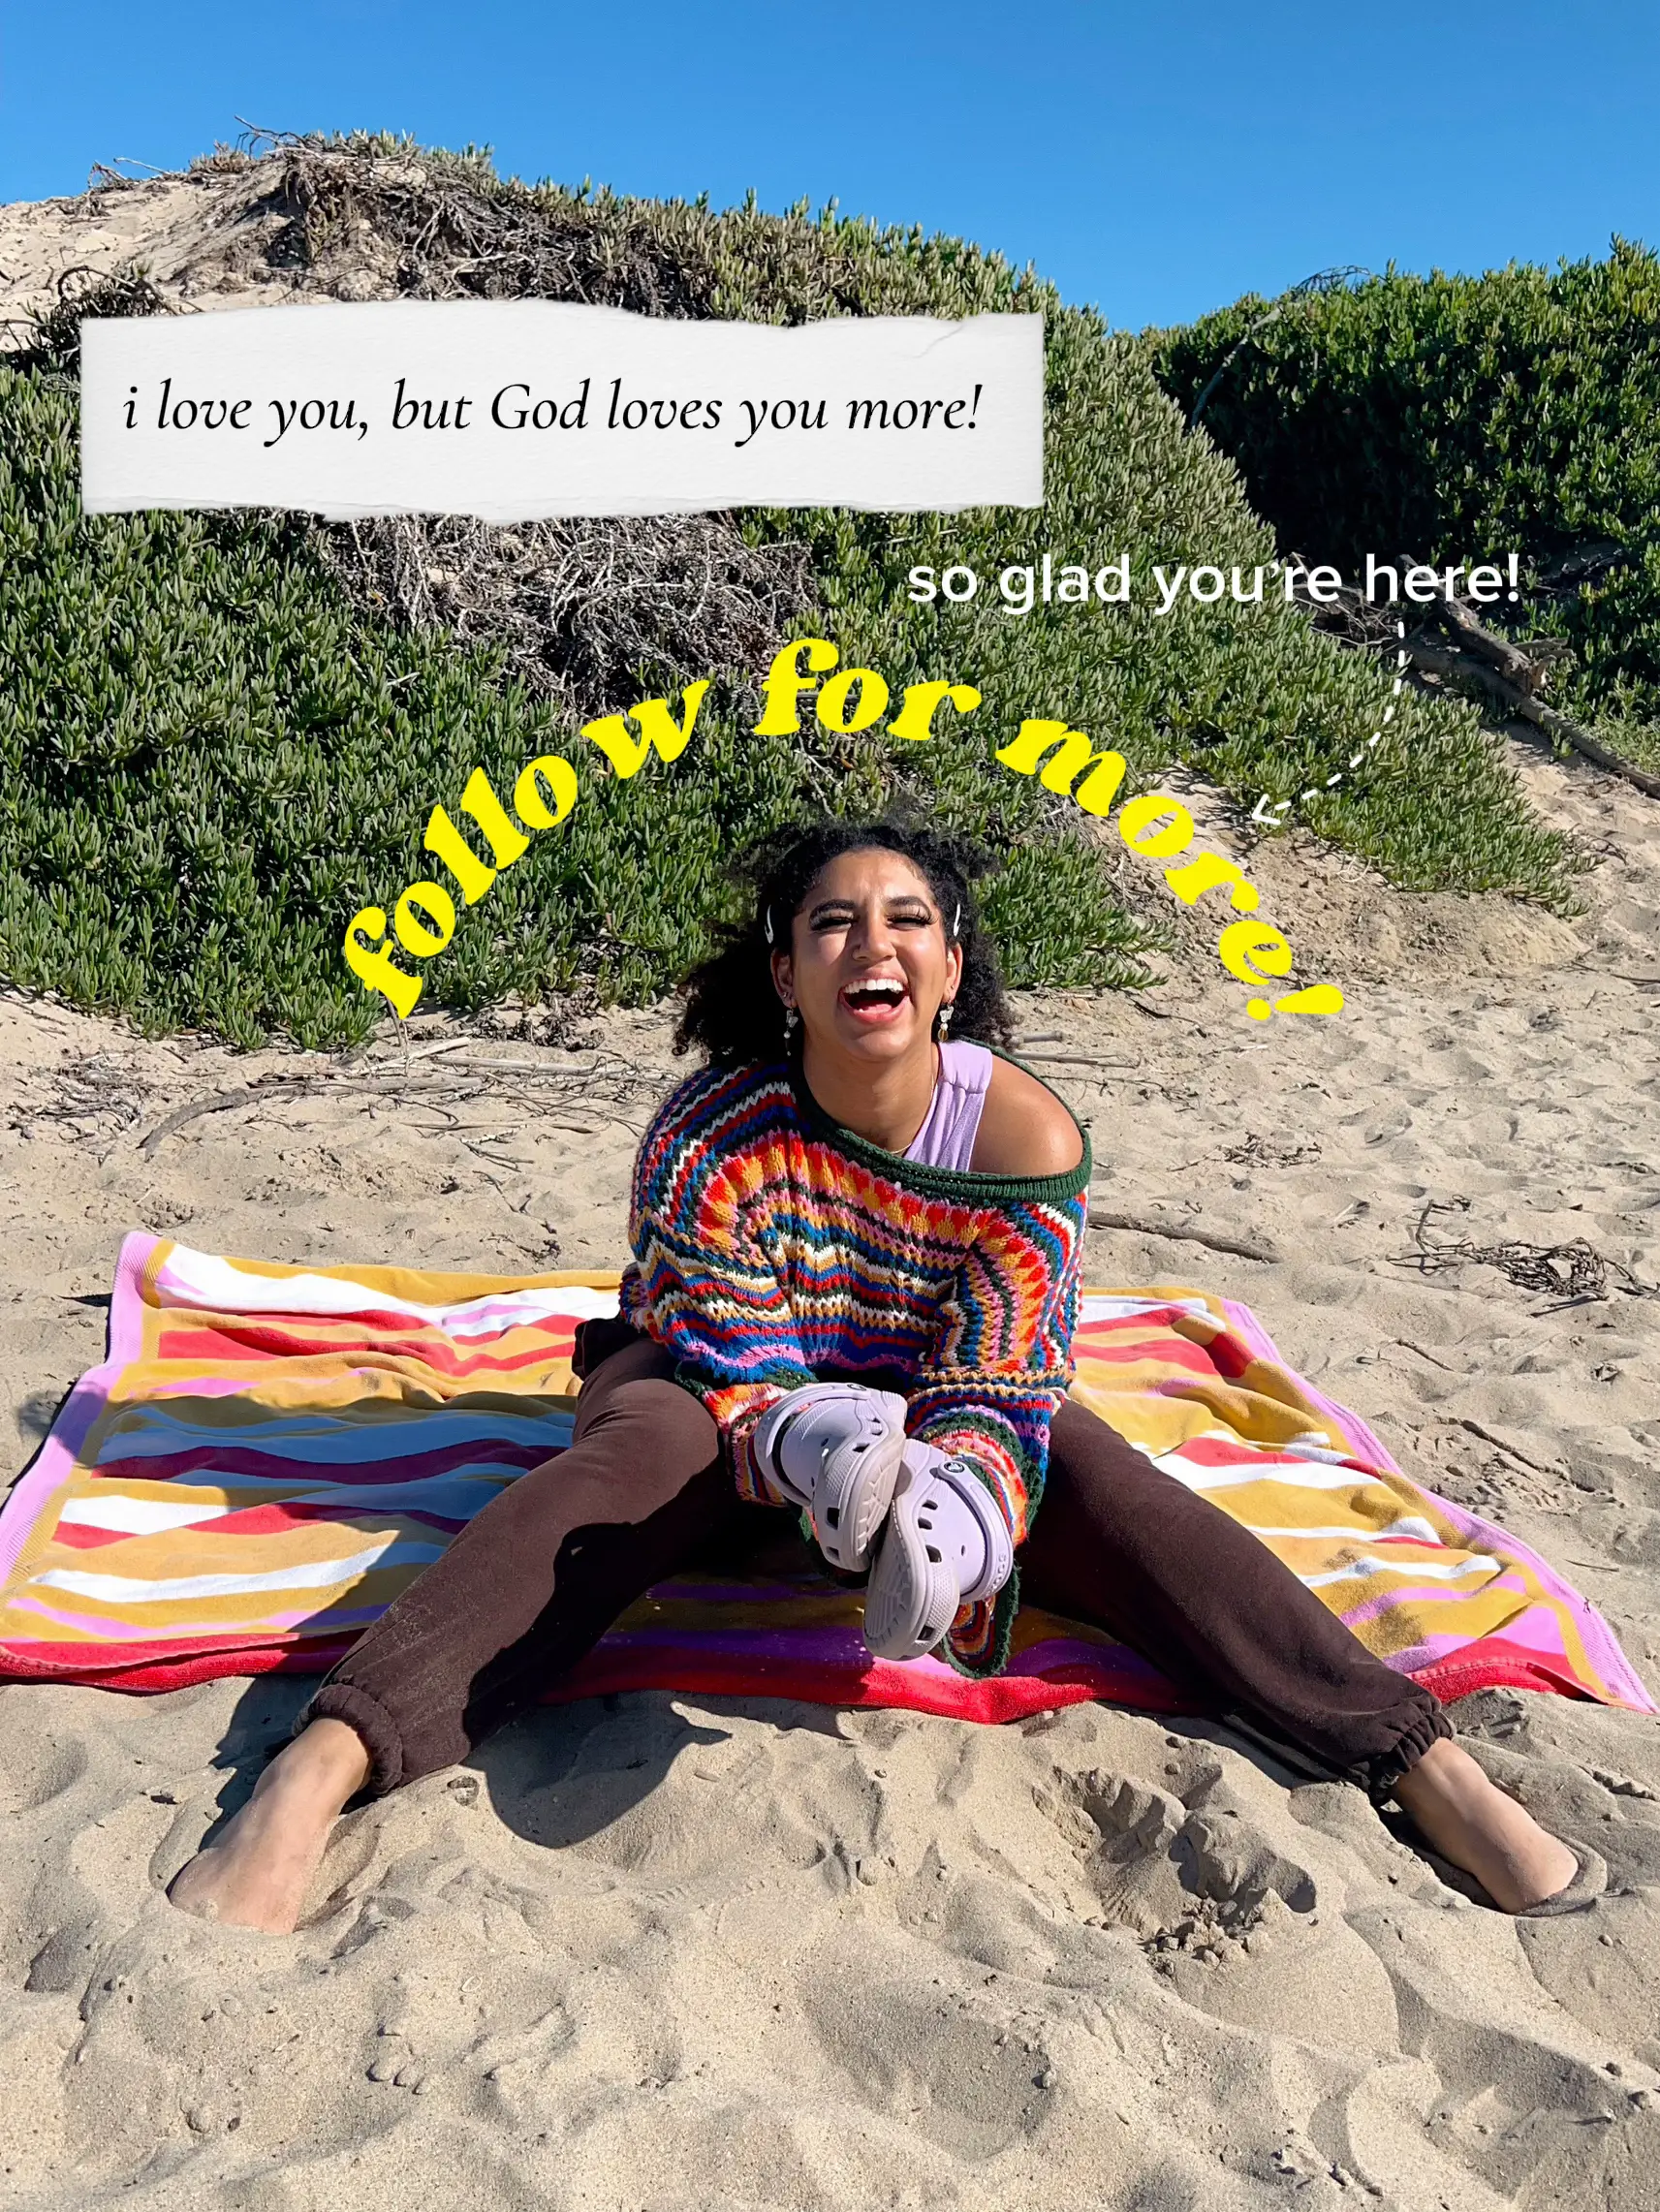  A woman is sitting on a blanket on the beach, and she is wearing a colorful sweater.